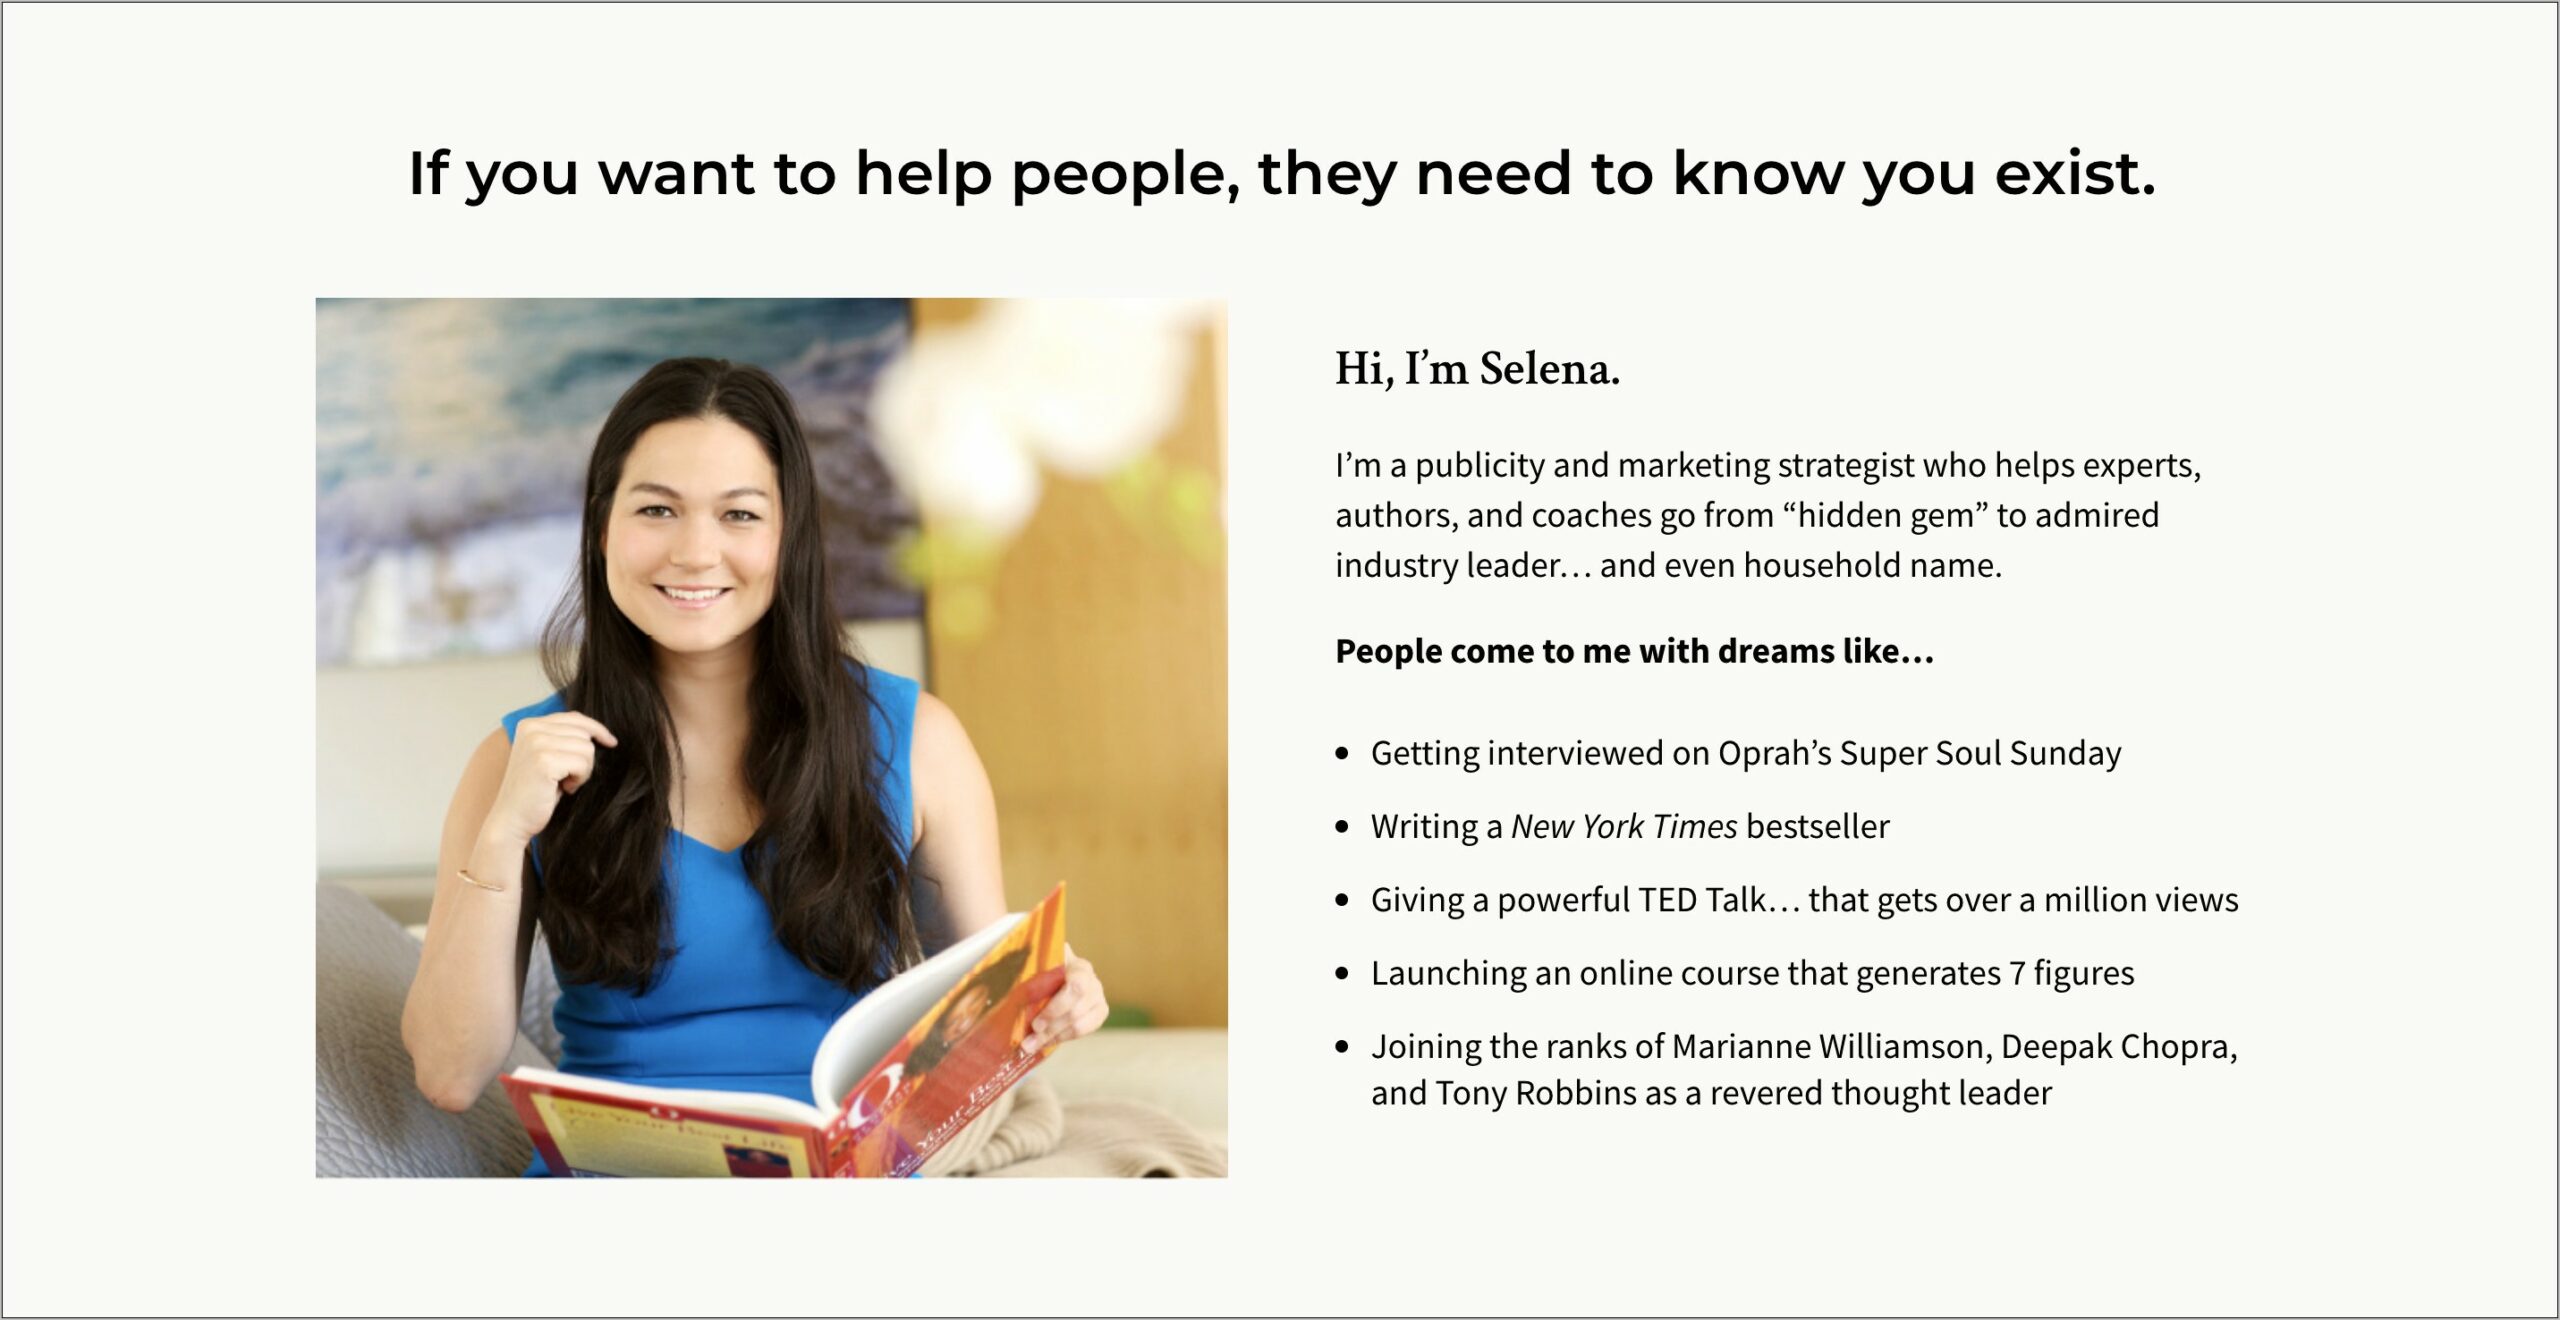 Personal Branding Statement Examples For Resumes